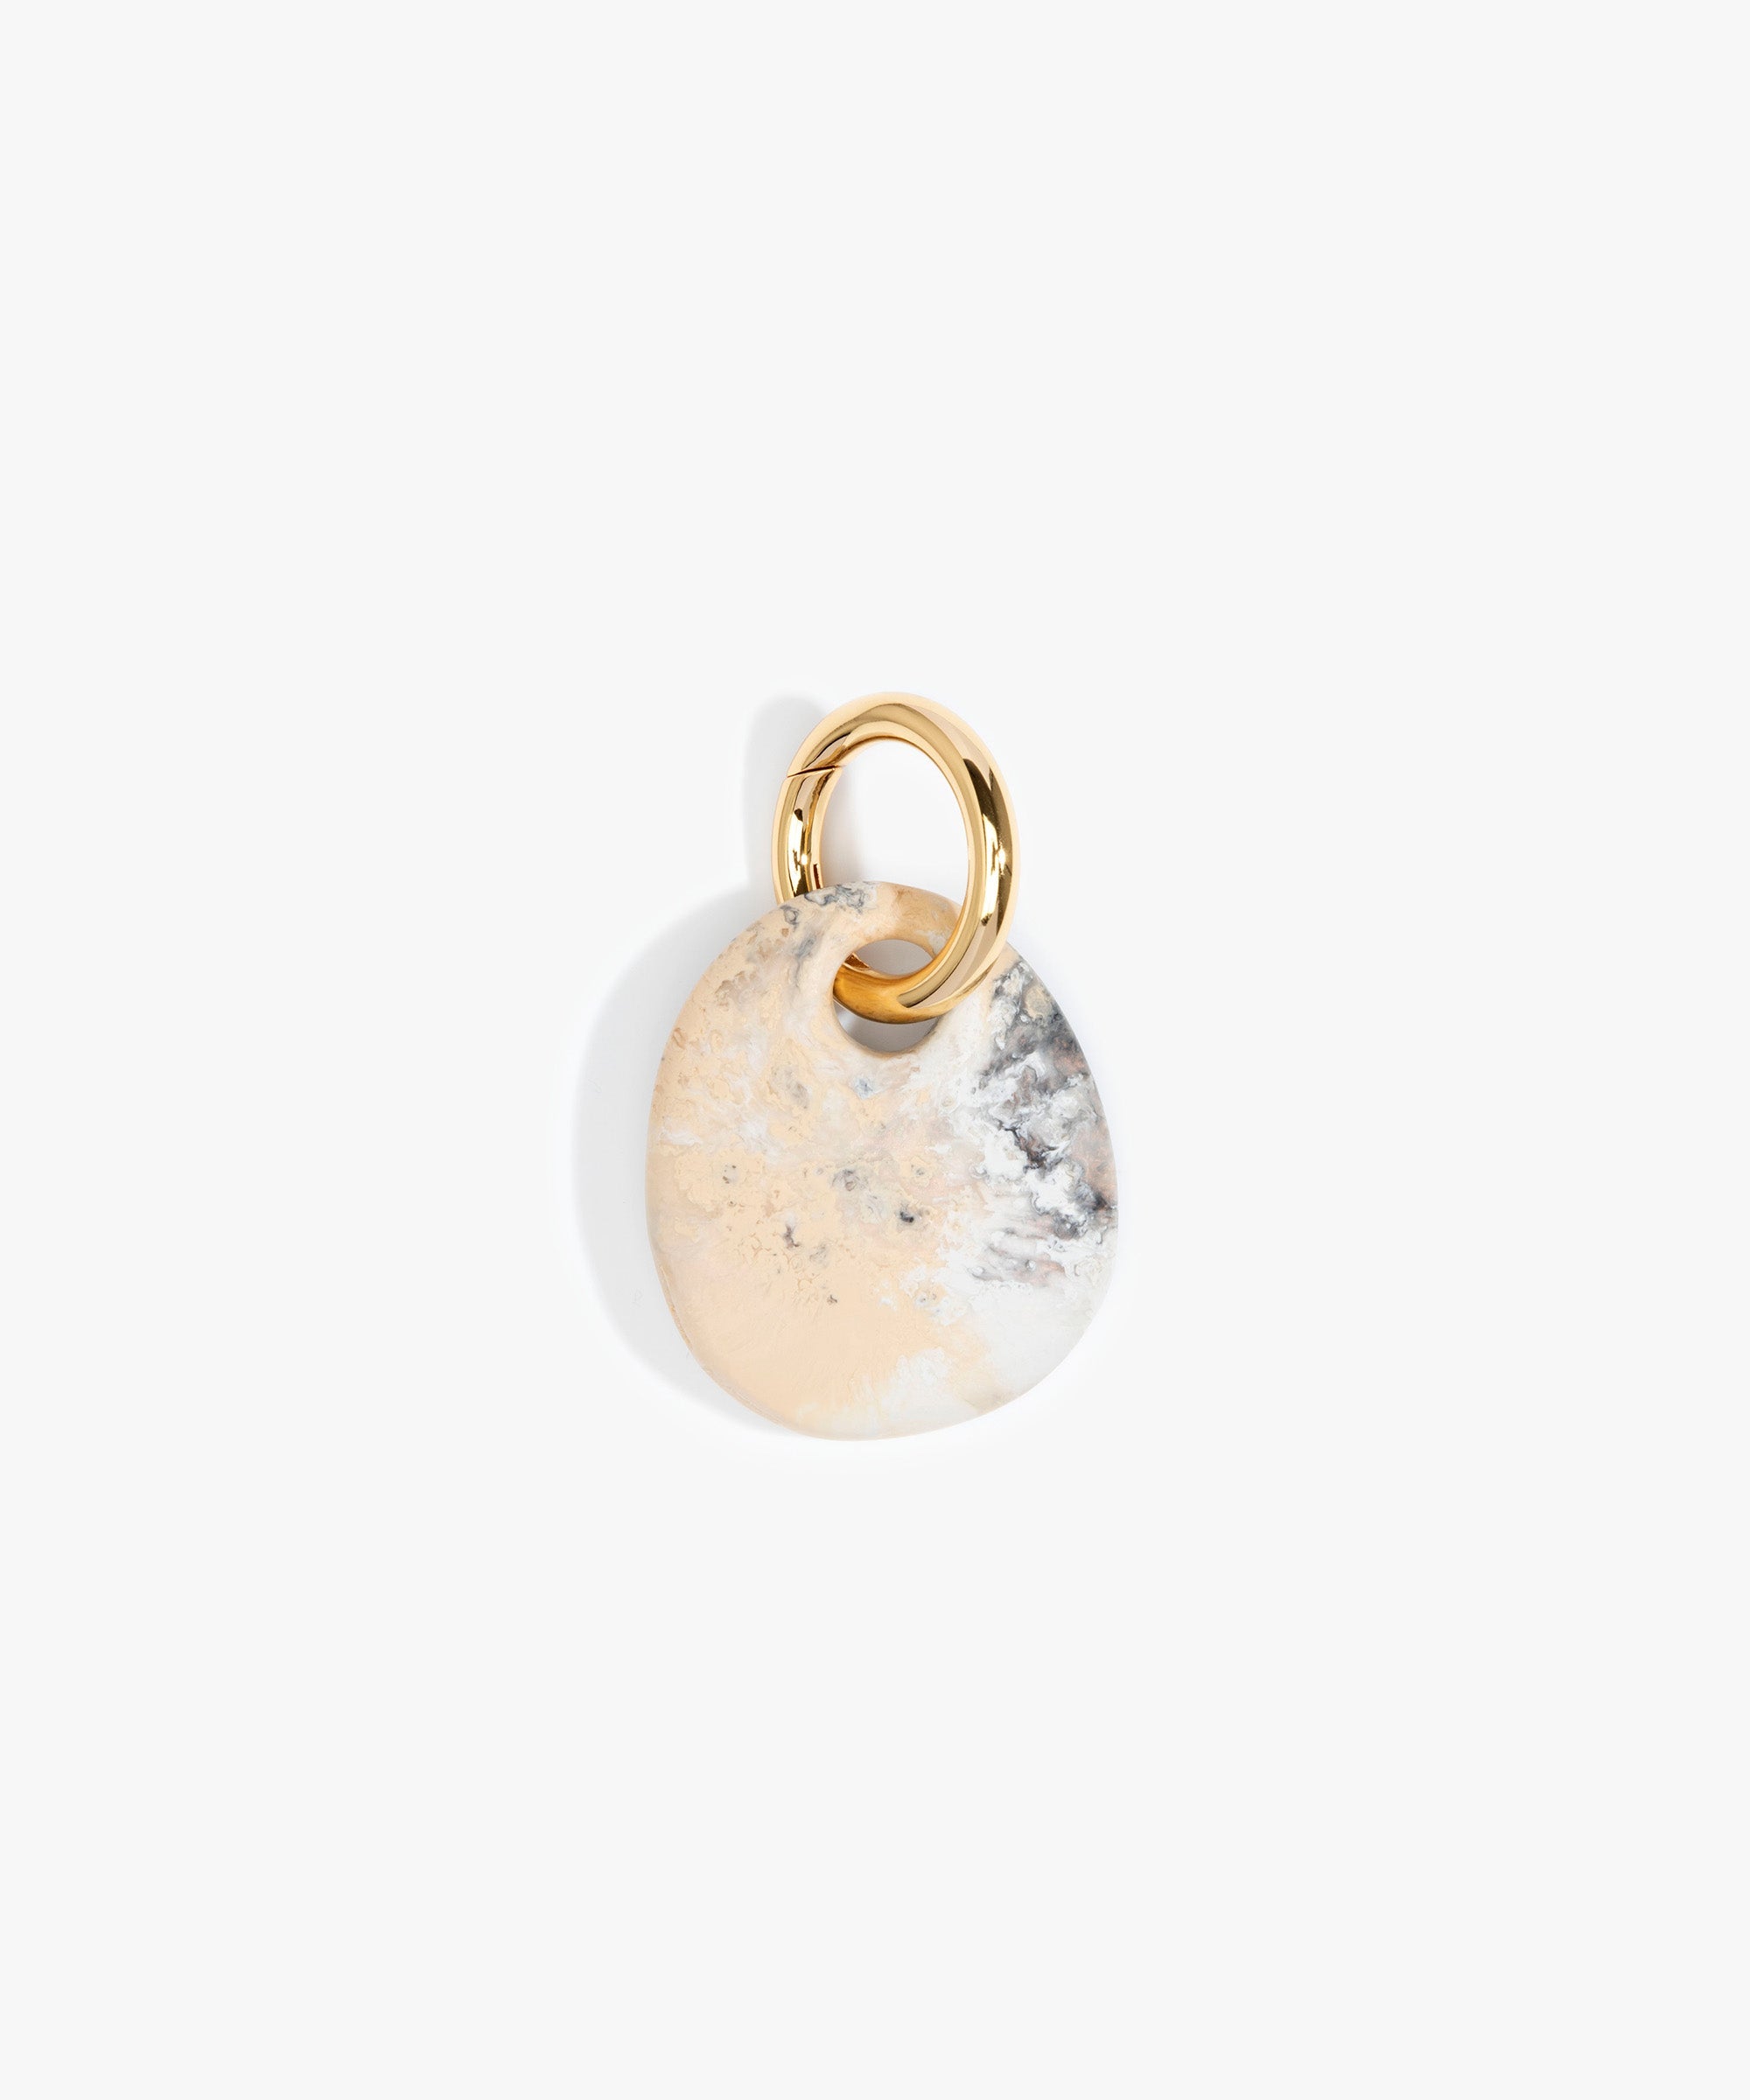 Dinosaur Designs Earth Keyring Keychains in Sandy Pearl color resin with Brass Metal